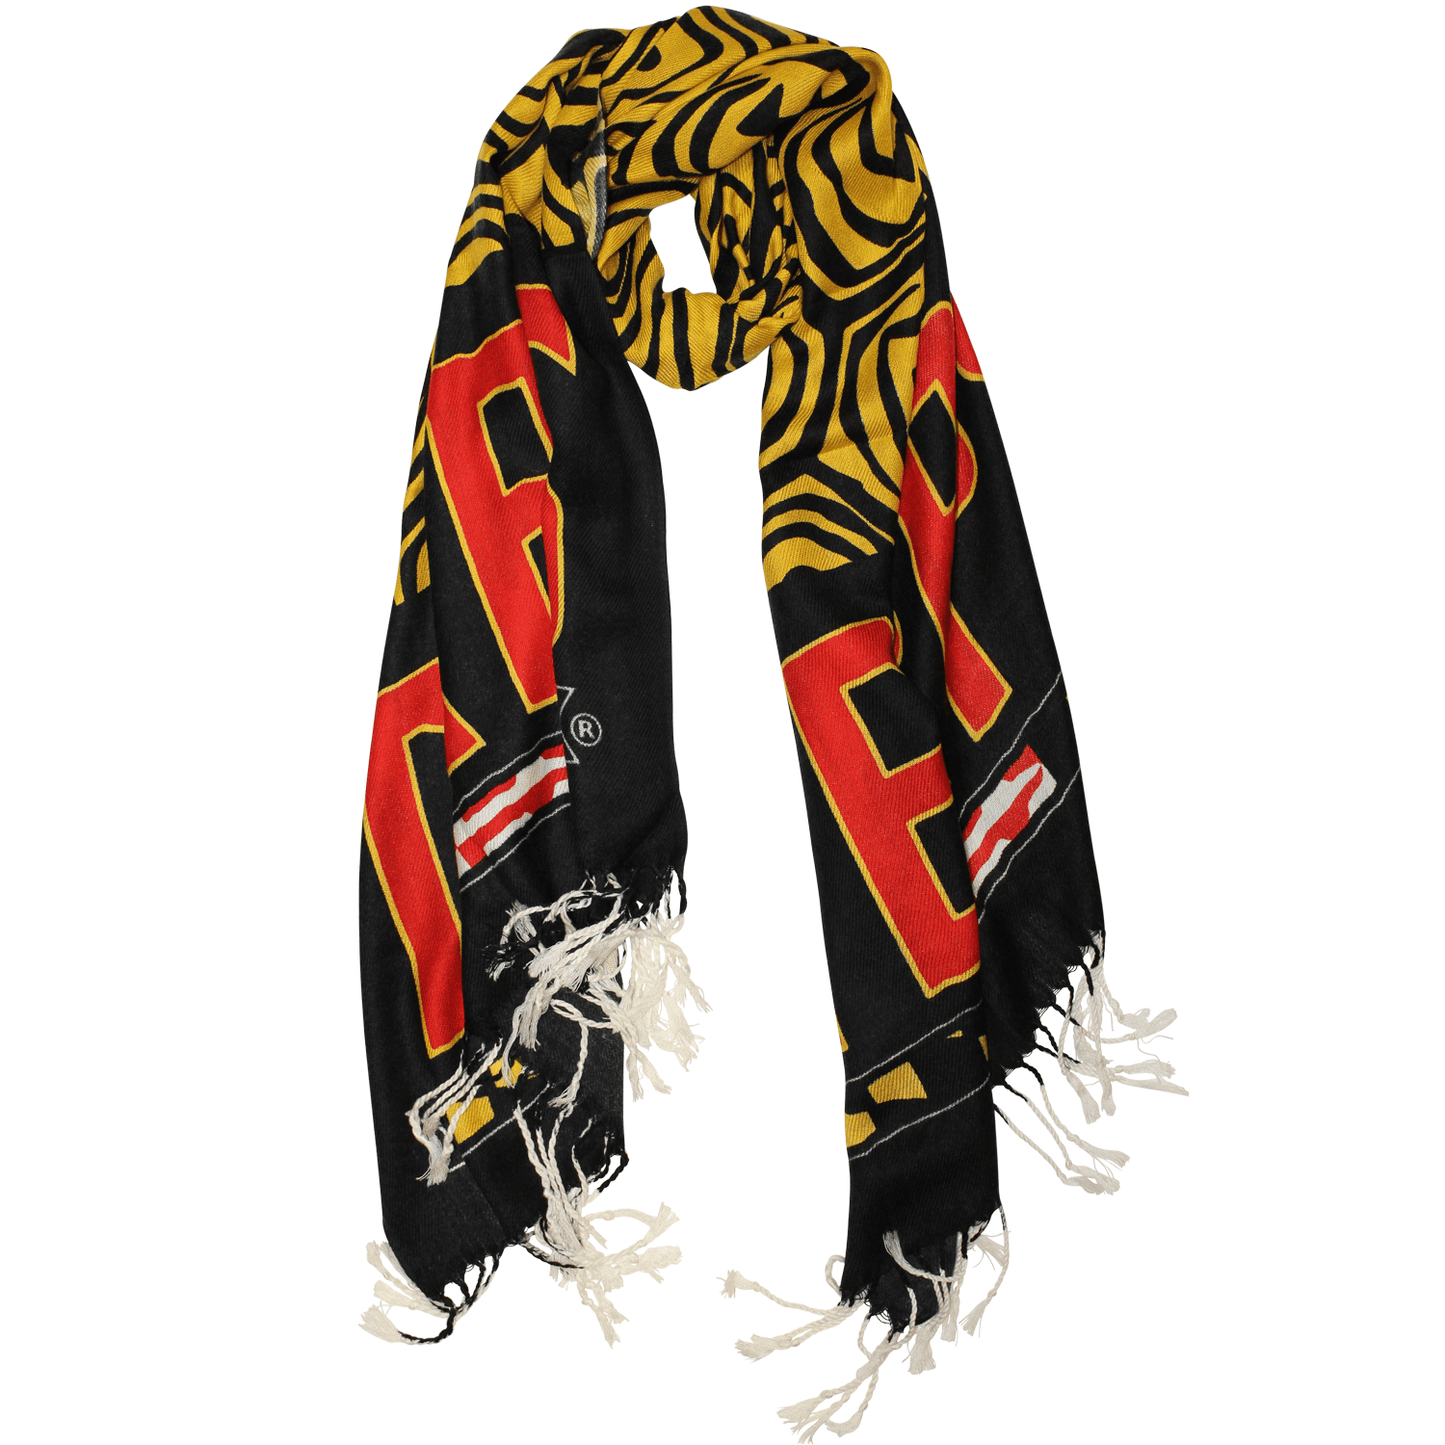 UMD Terps & Turtle Shell (Black & Gold) / Scarf - Route One Apparel